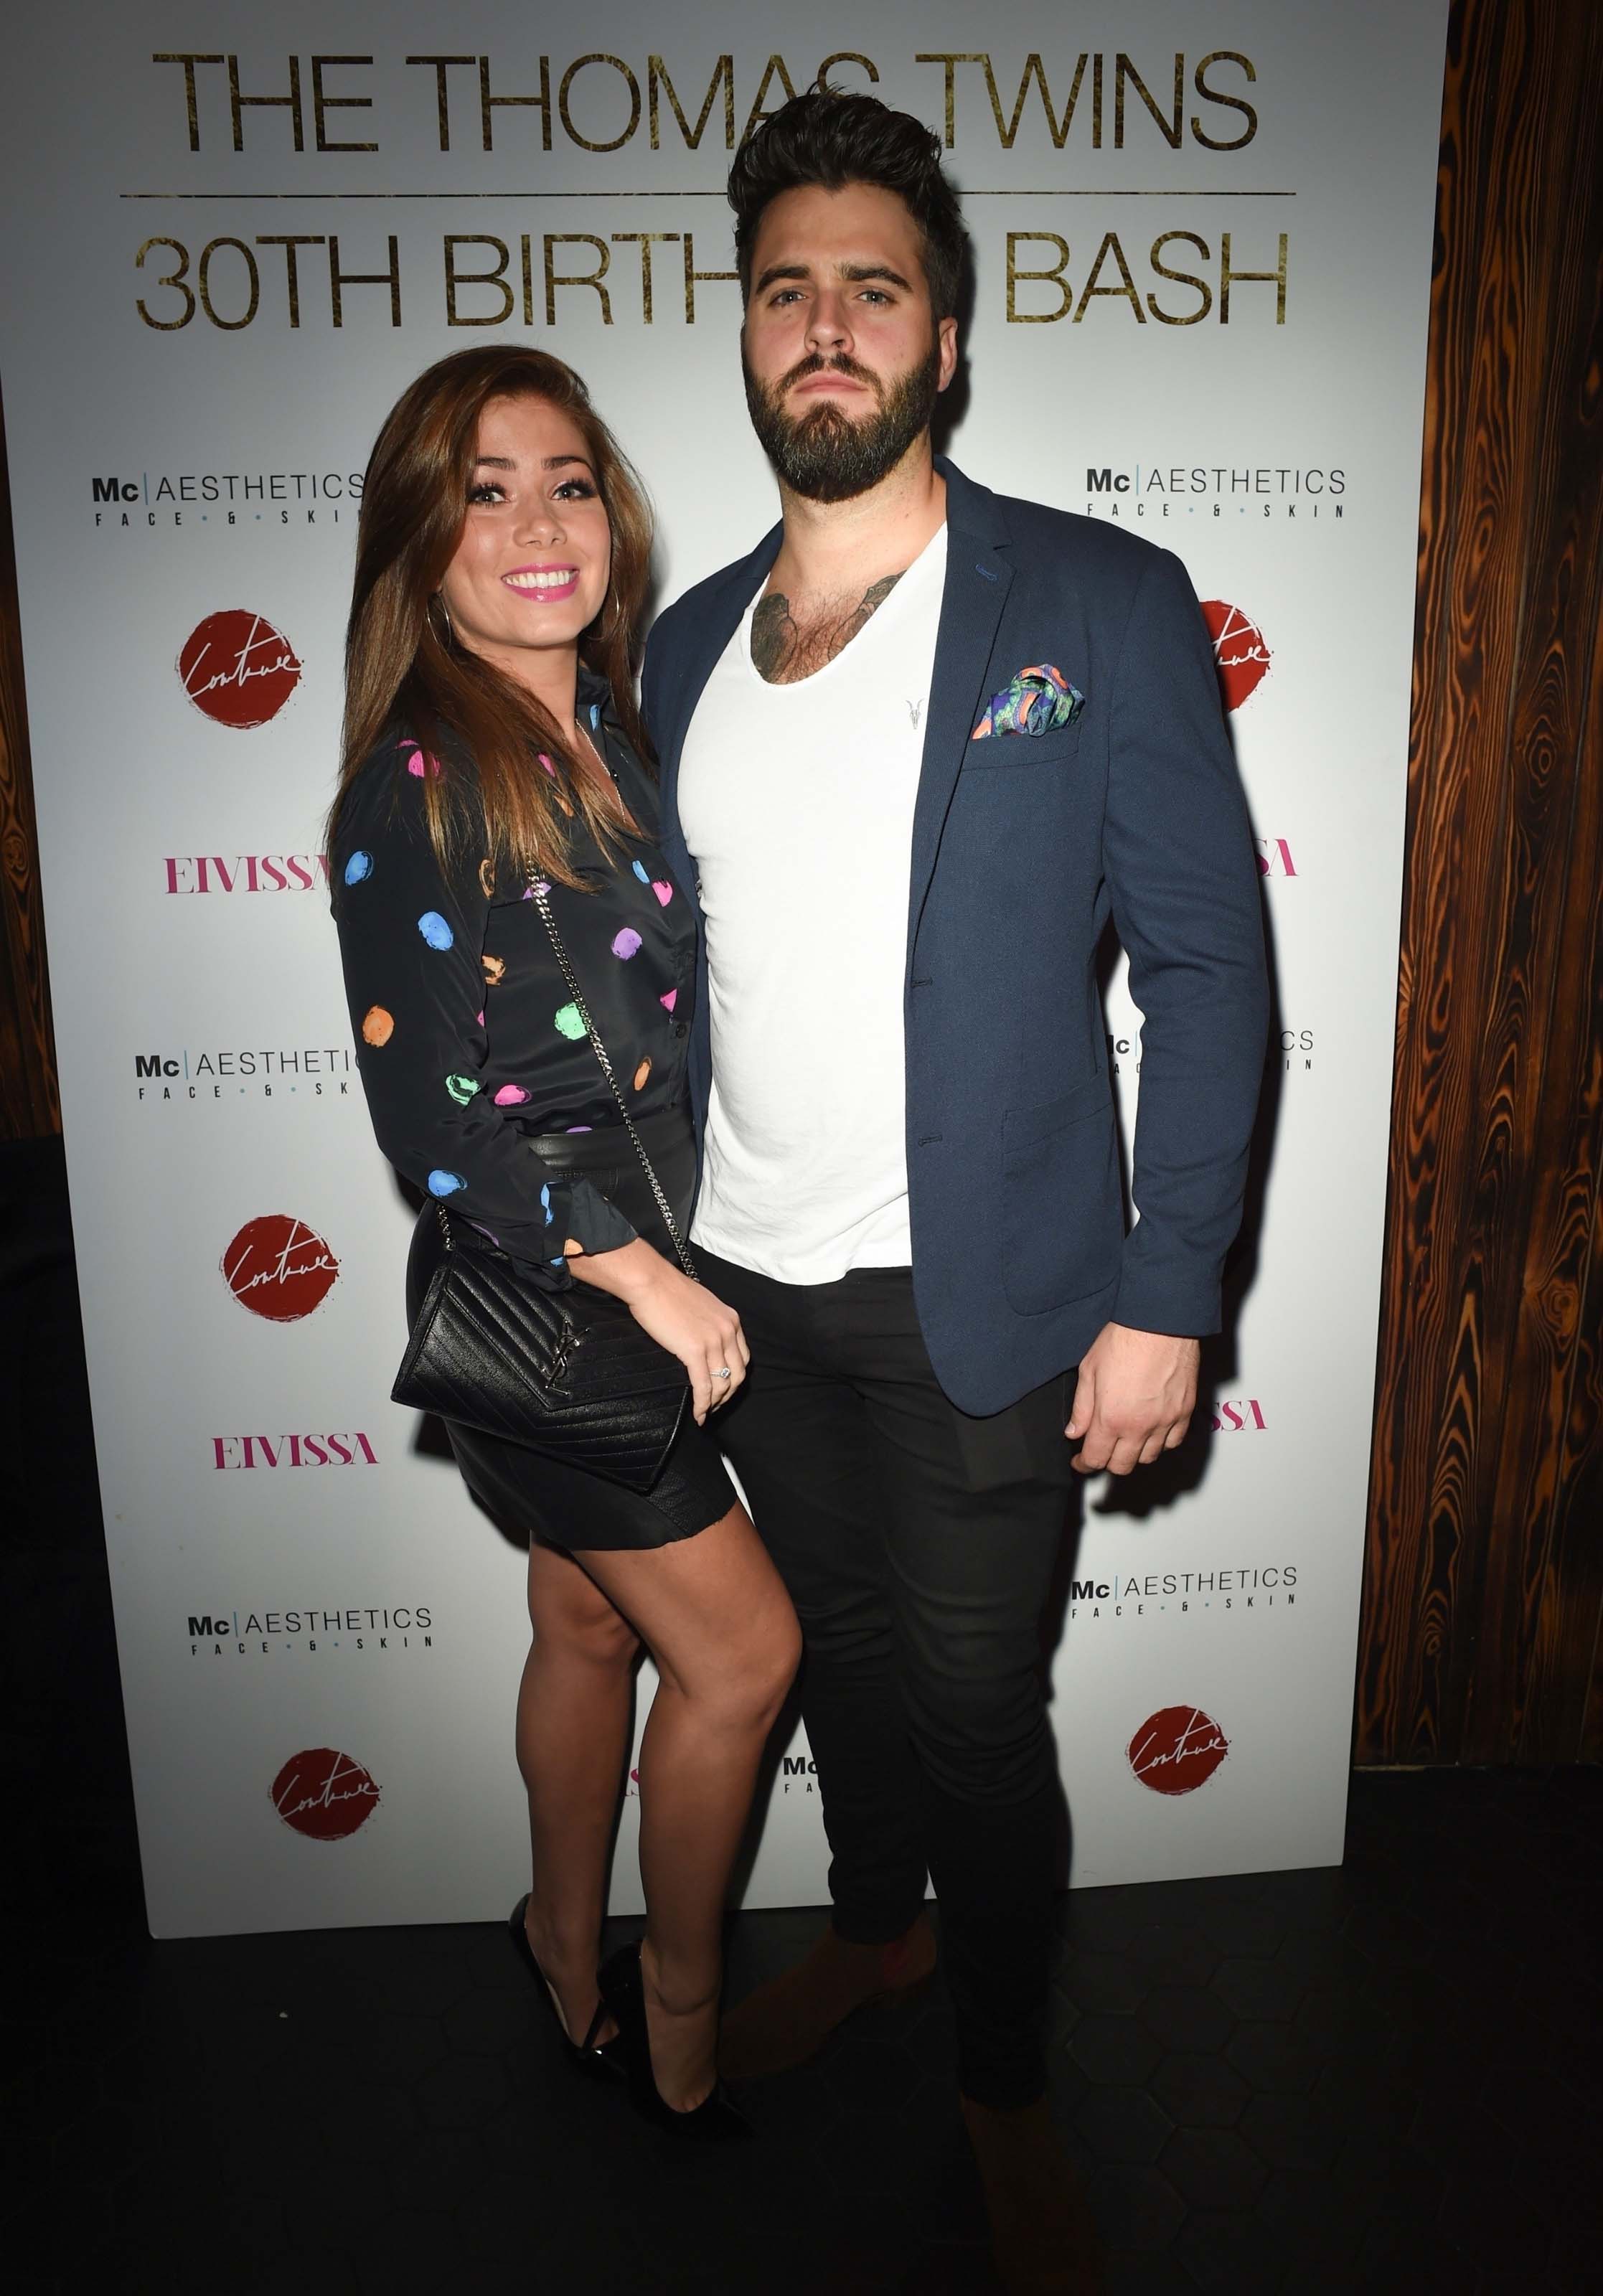 Nikki Sanderson attends The Thomas Twins 30th Birthday Party